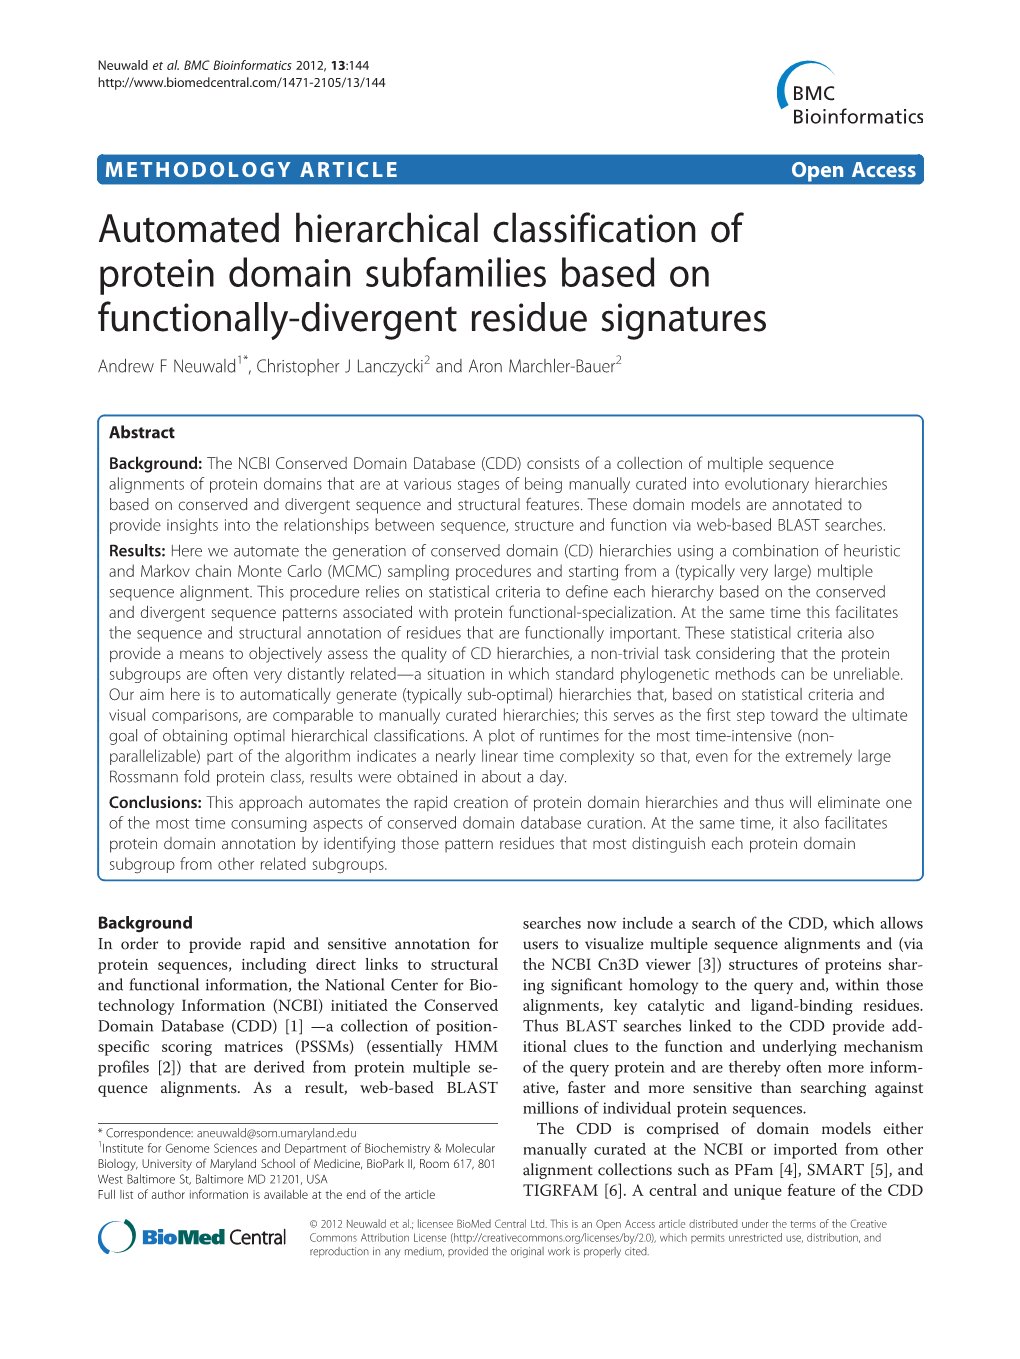 Automated Hierarchical Classification of Protein